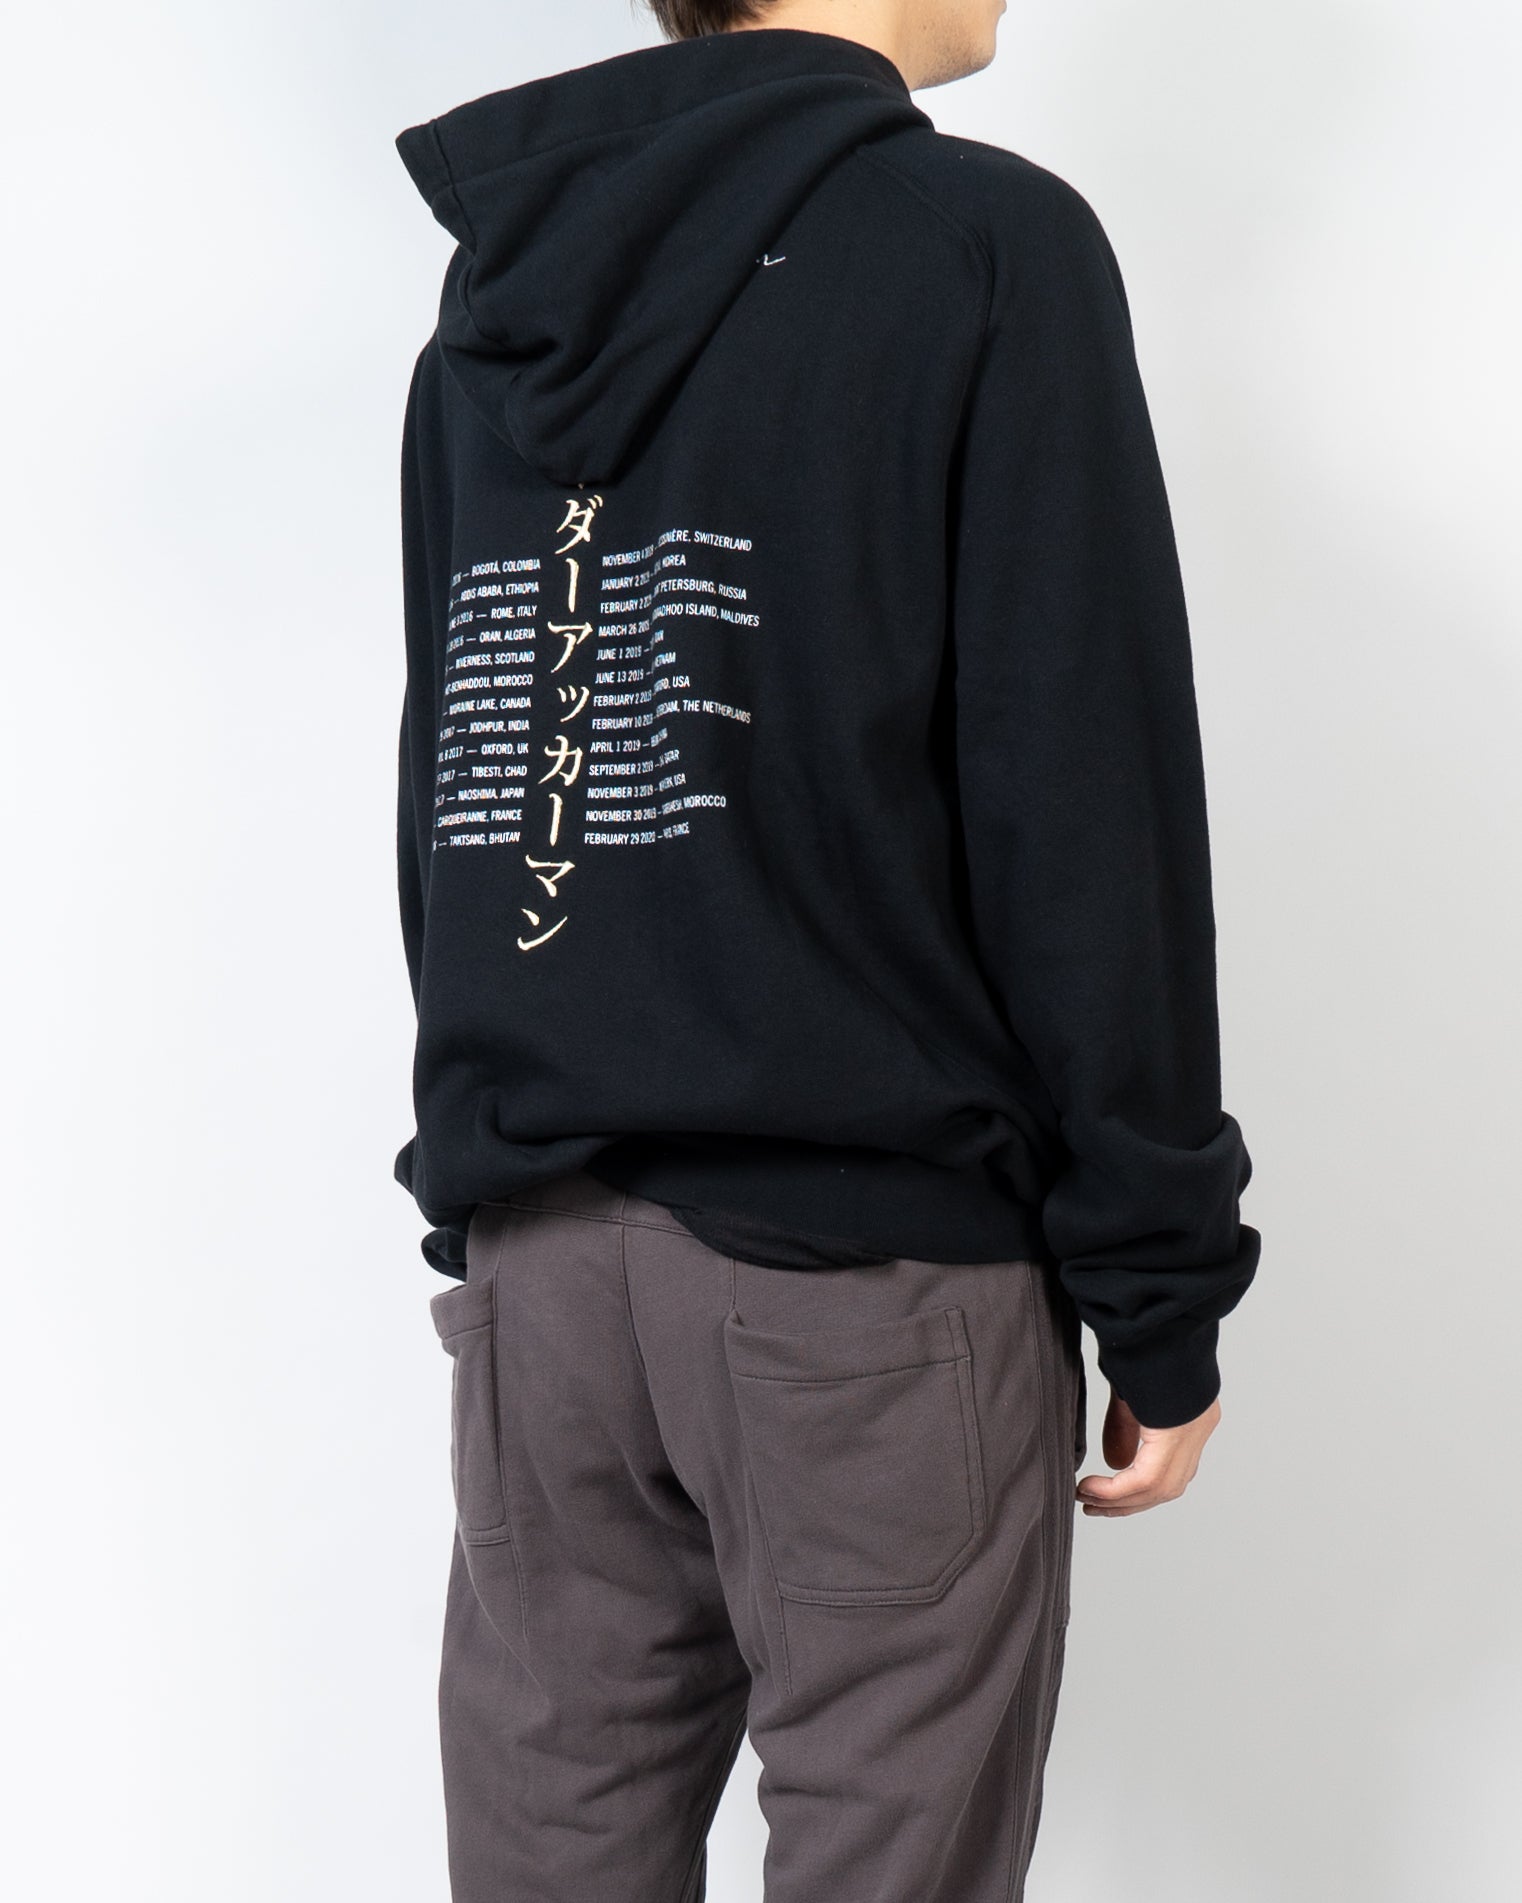 FW20 Private Dancer Embroidered Perth Hoodie